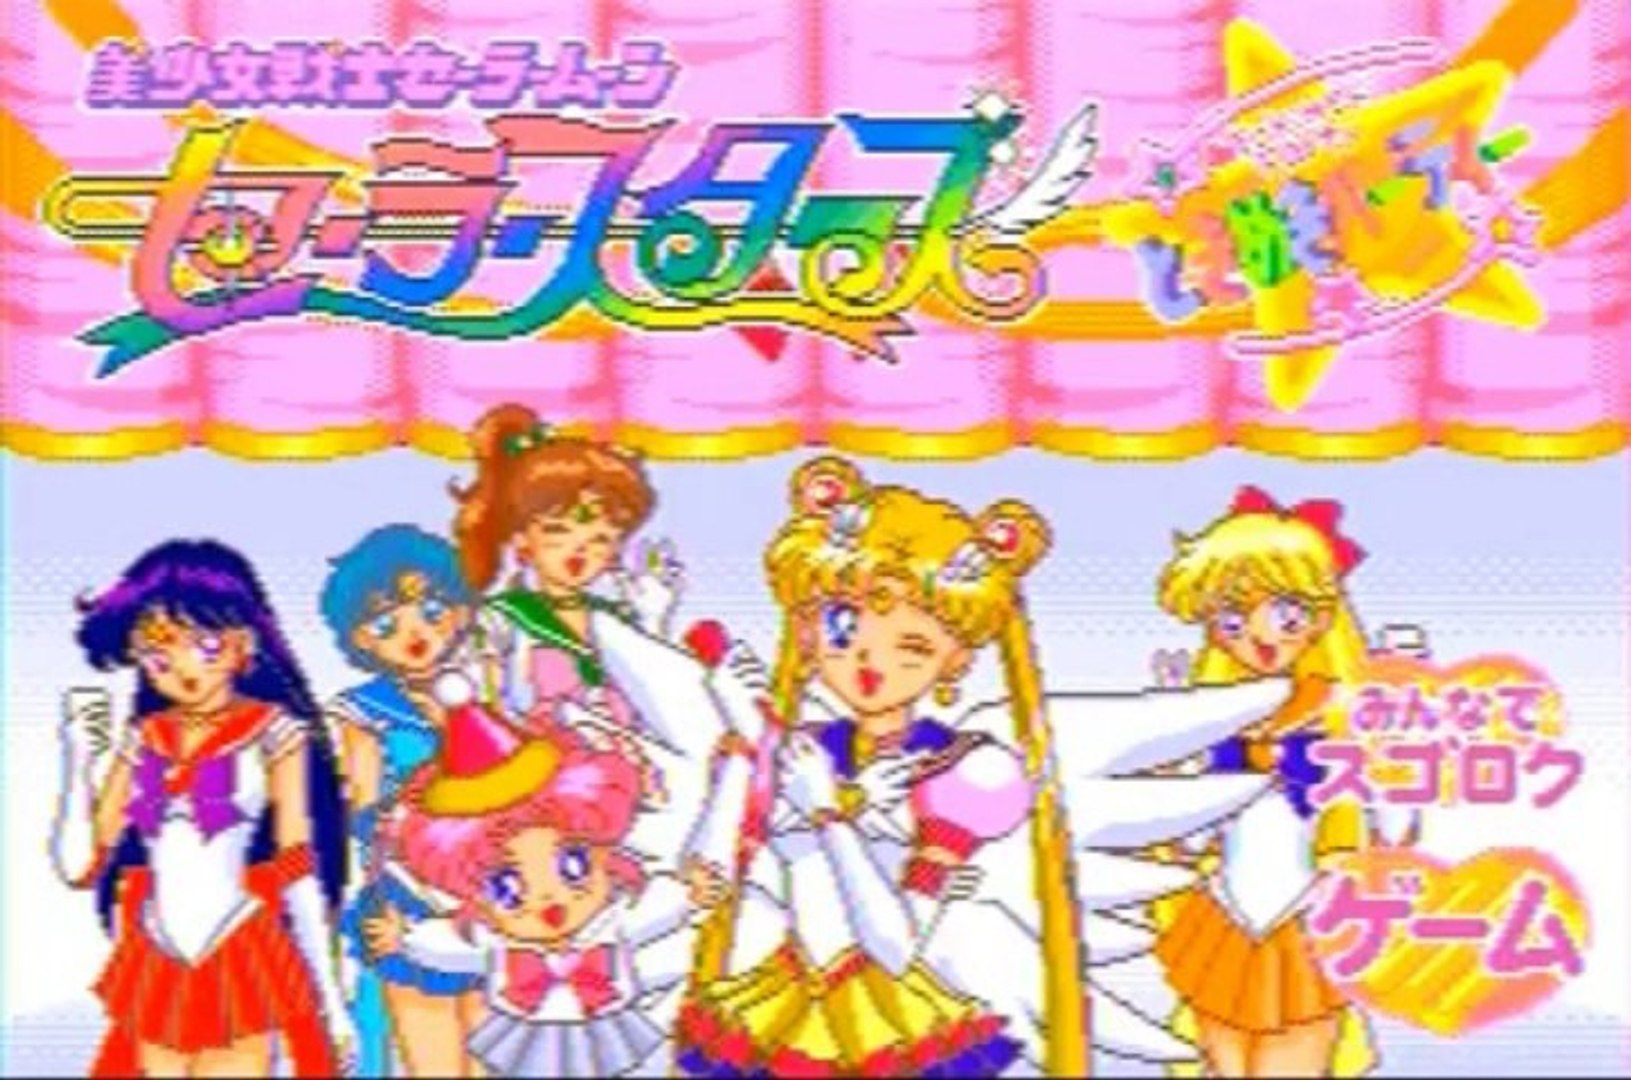 The title screen for the game, with the main cast of characters - Webcore